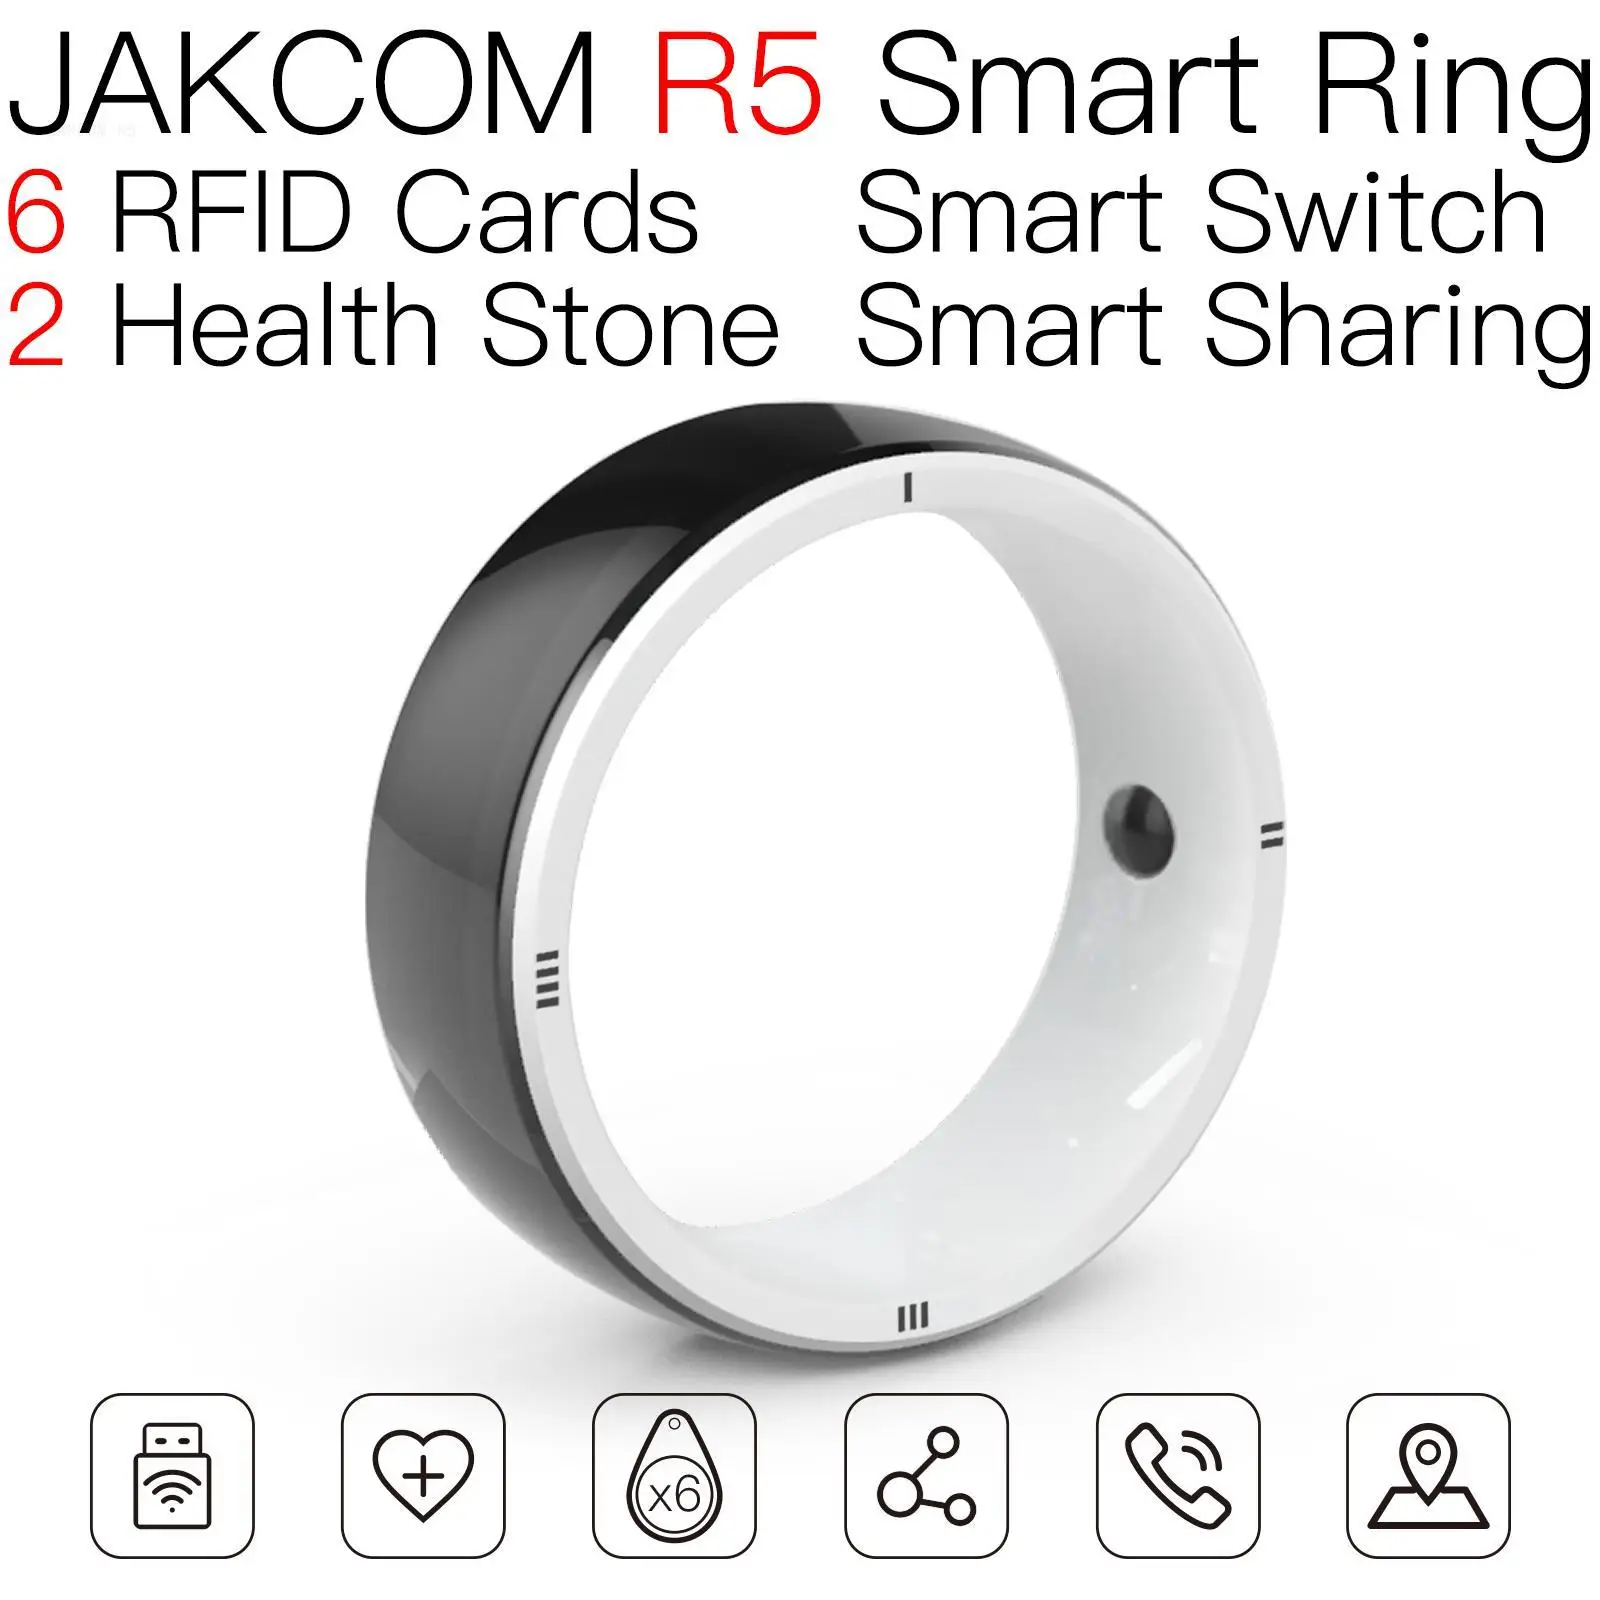 

JAKCOM R5 Smart Ring Newer than player nfc ile a don inserto rfid bague uid programmable handheld uhf reader tag animals